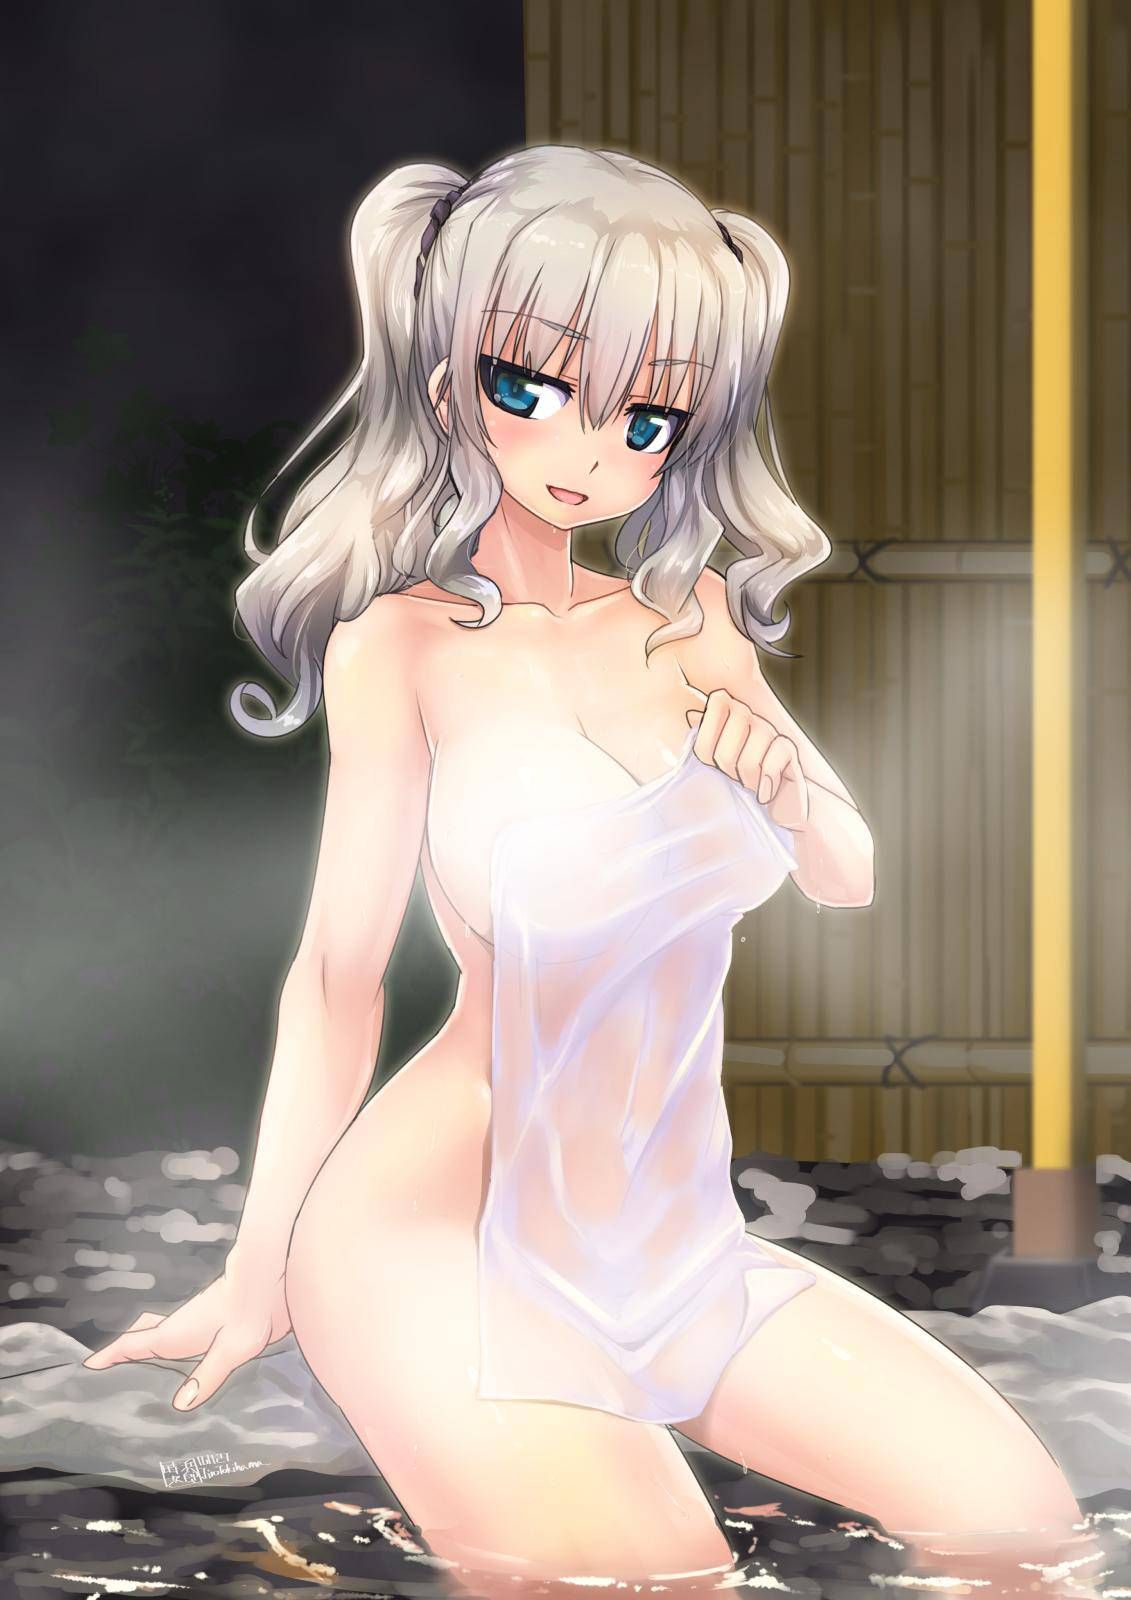 [Secondary] erotic image of the heart eye essential towel that are firmly hiding in the towel 16